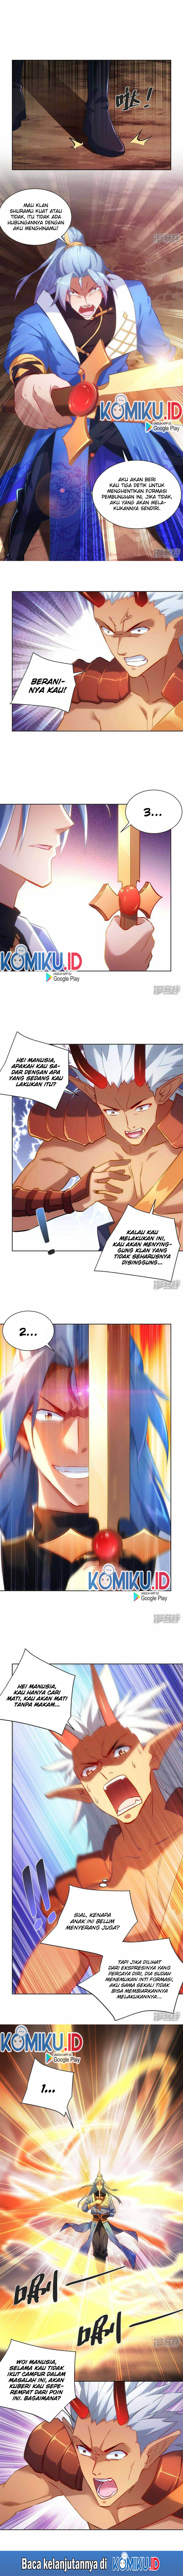 Rebirth After 80.000 Years Passed Chapter 239